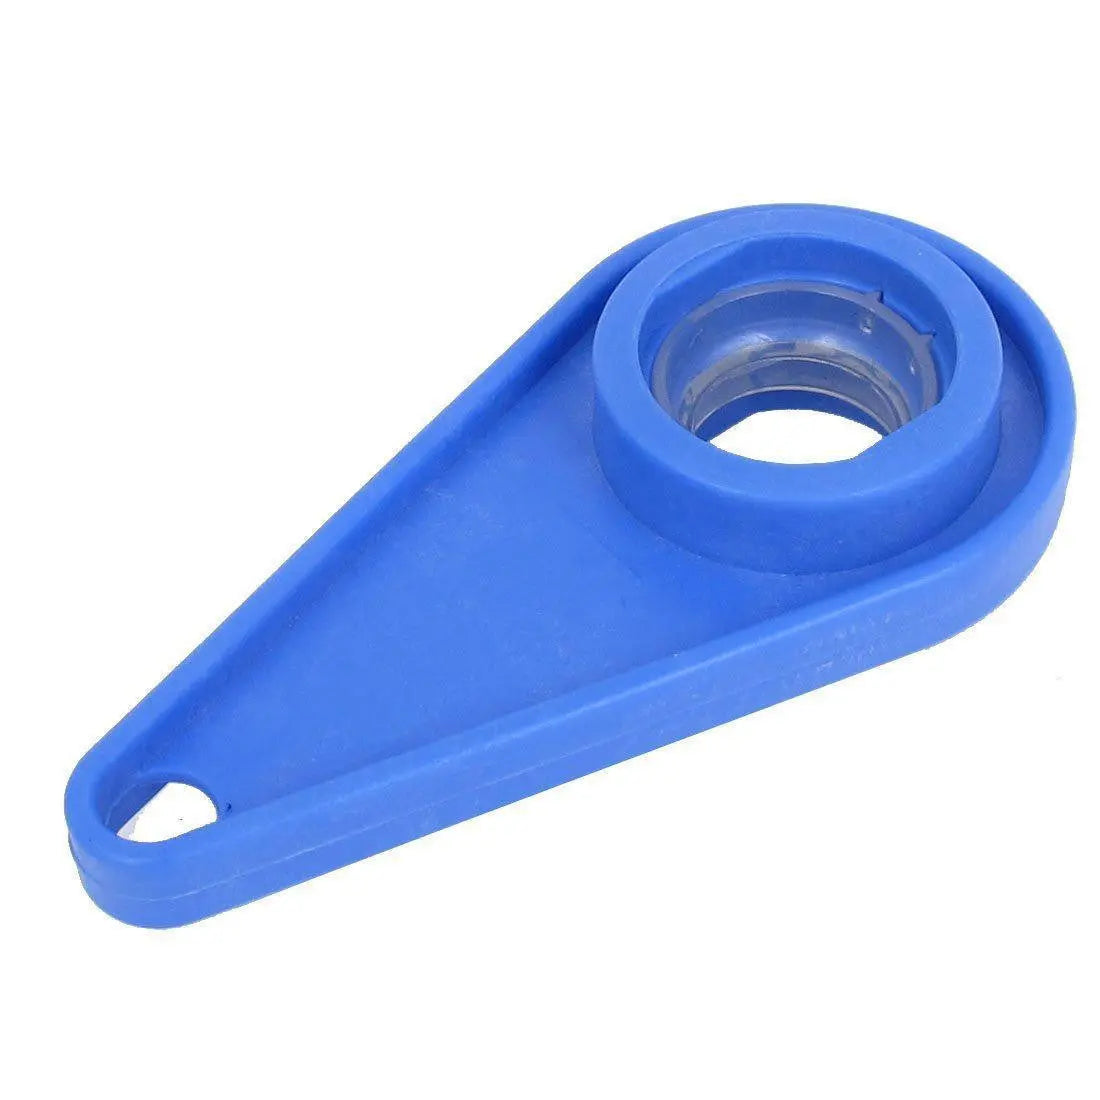 Faucet Tap Aerator Installation Key Opening Tool Universal - Tap Accessories